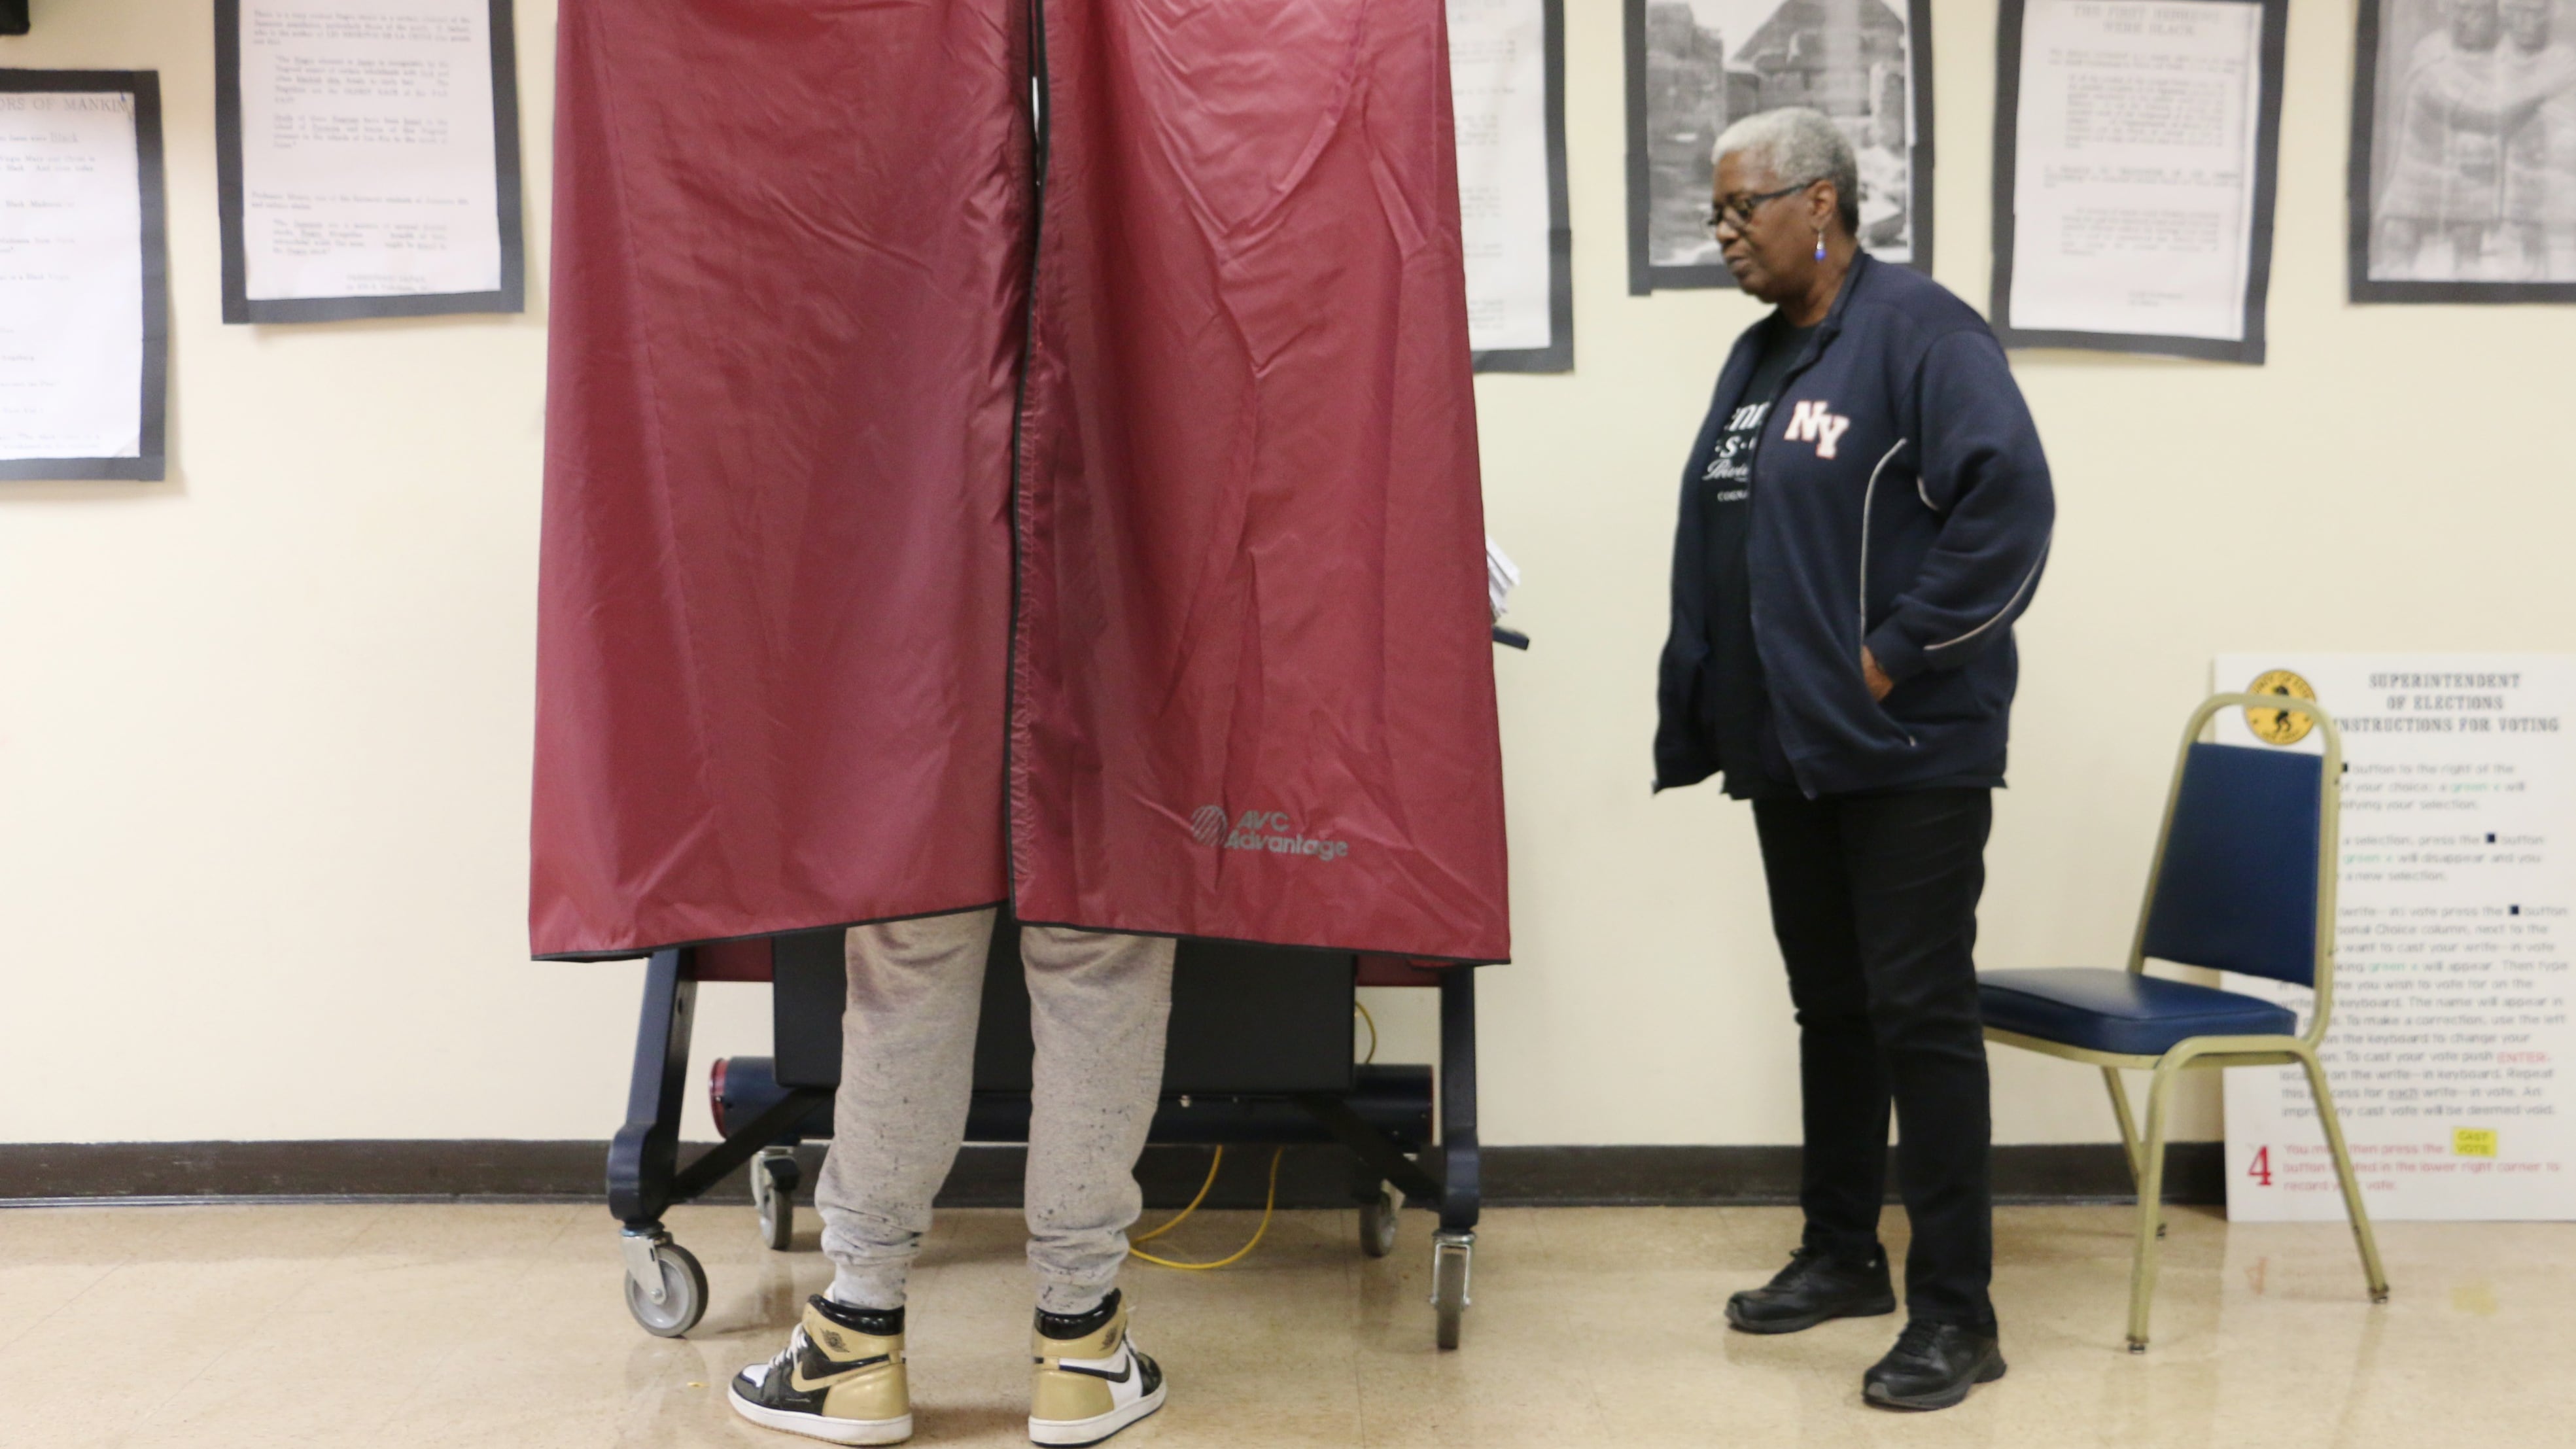 One person stands outside of a voting booth while one person is using the voting booth in a room with large picture frames on the wall in the background.